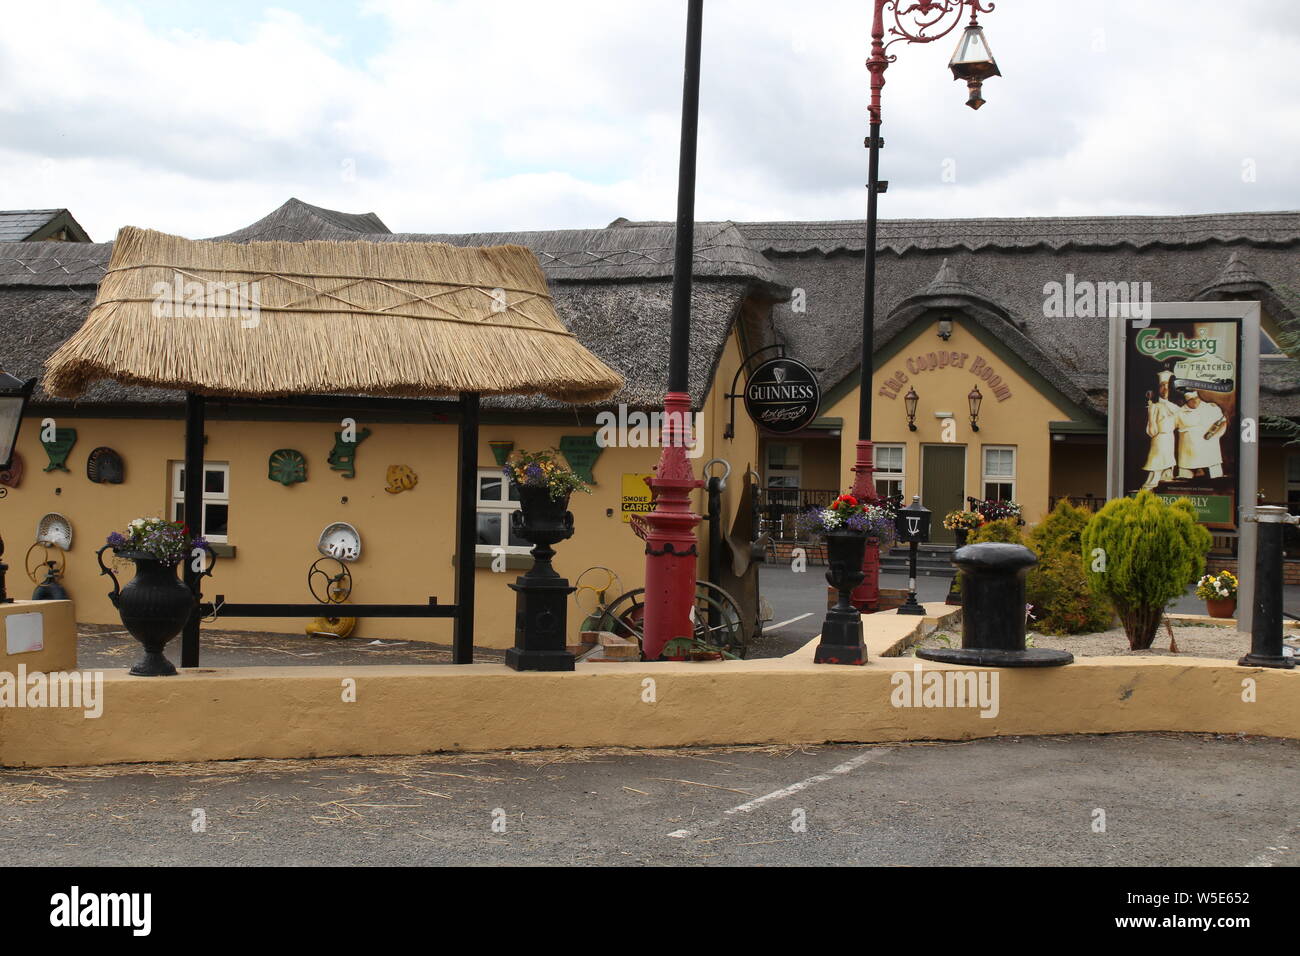 Thatched Cottage Restaurant Stock Photos Thatched Cottage